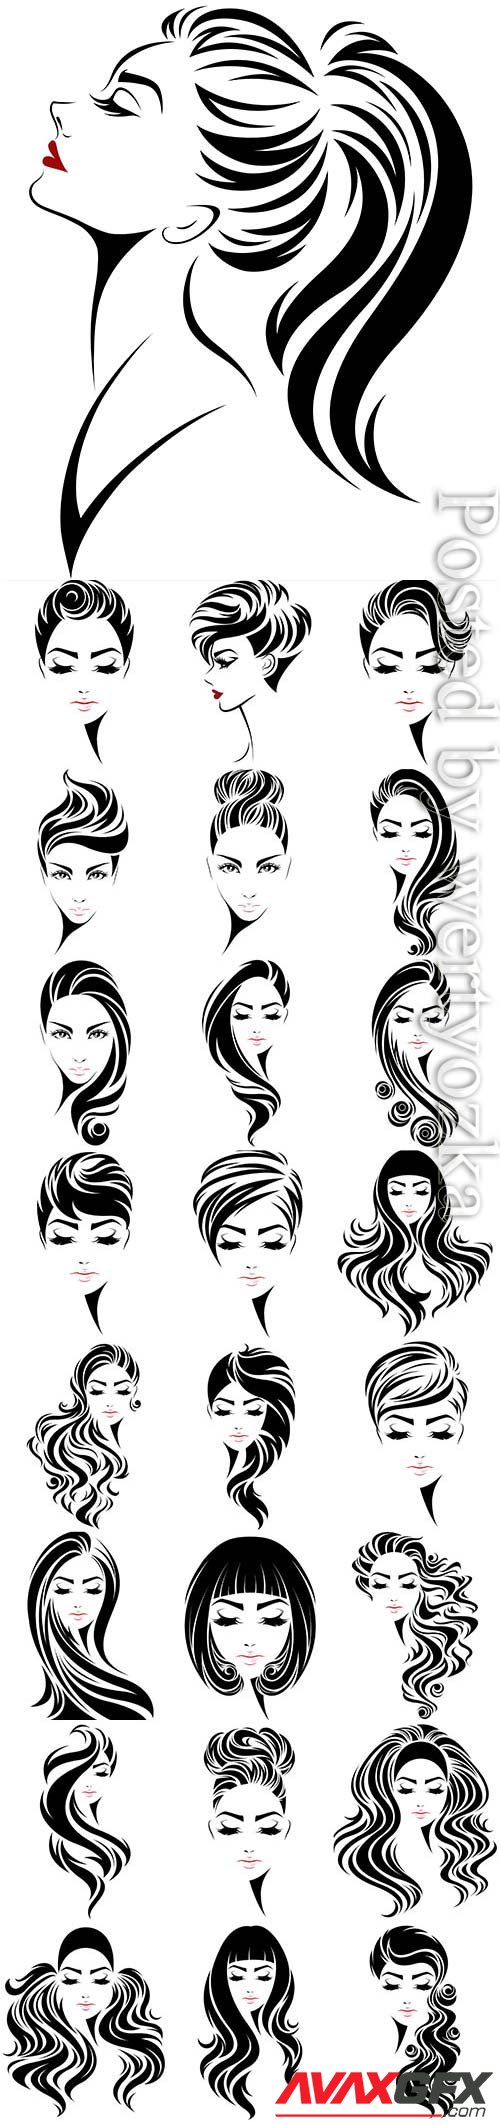 Drawn faces of girls with different hairstyles in vector